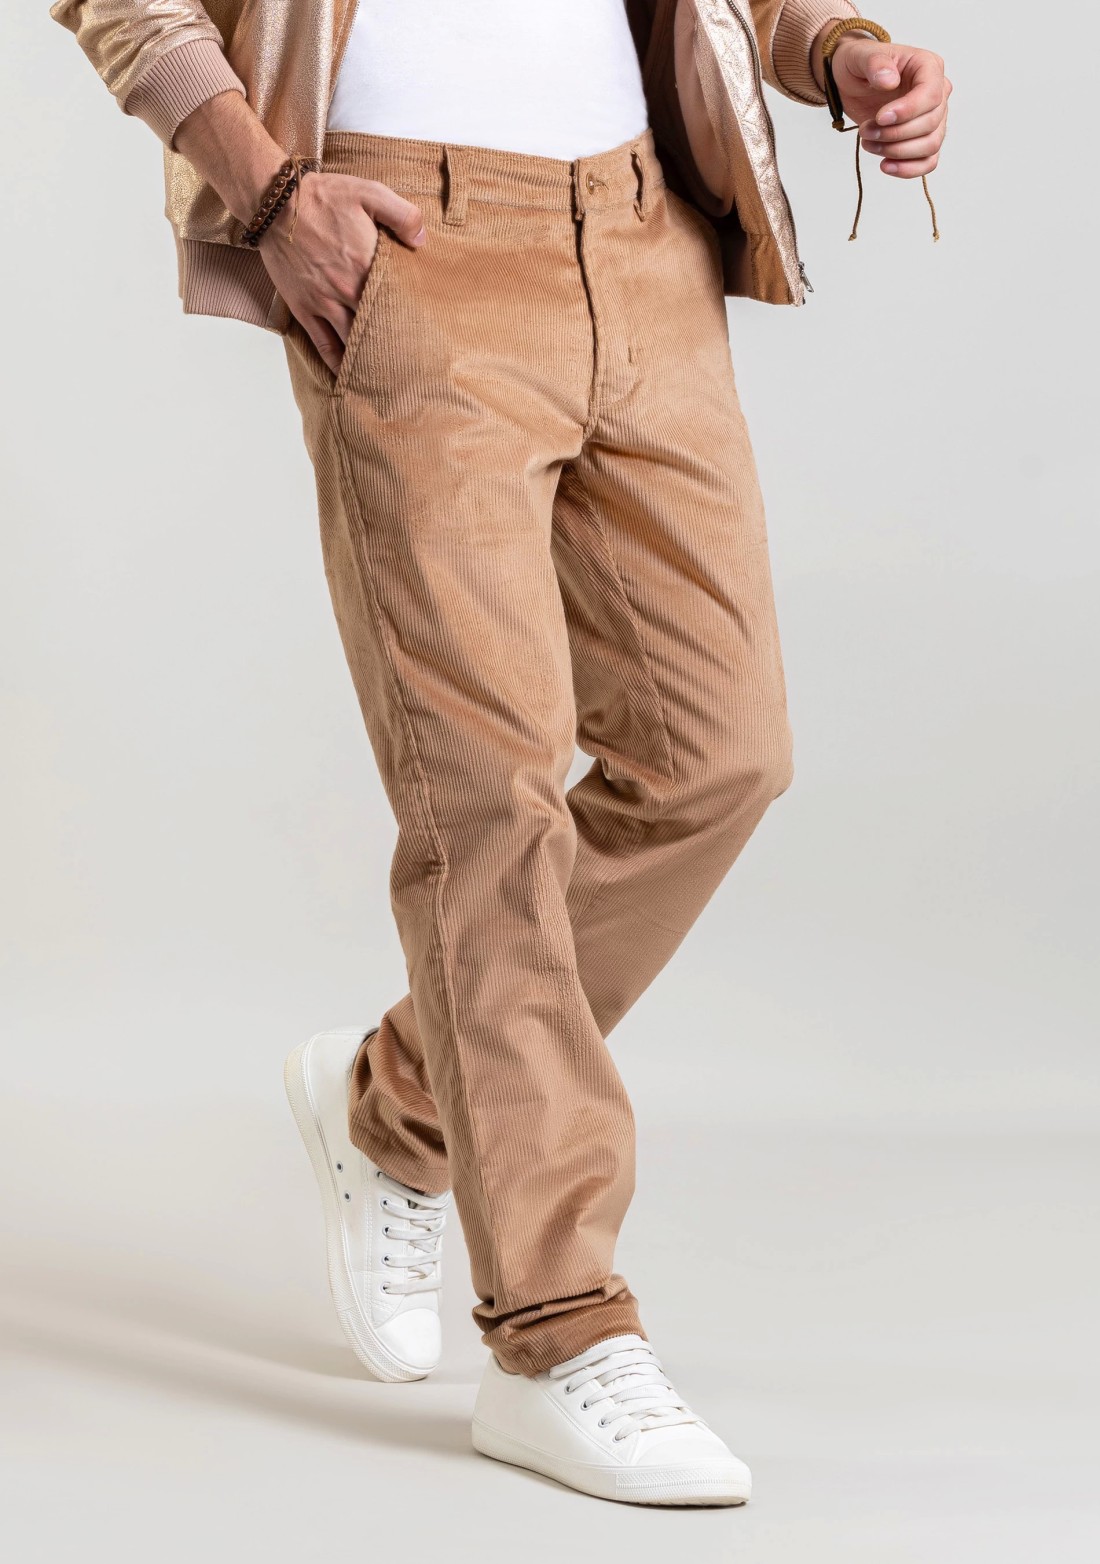 The 15 Best Corduroy Pants of 2023: Reviewed